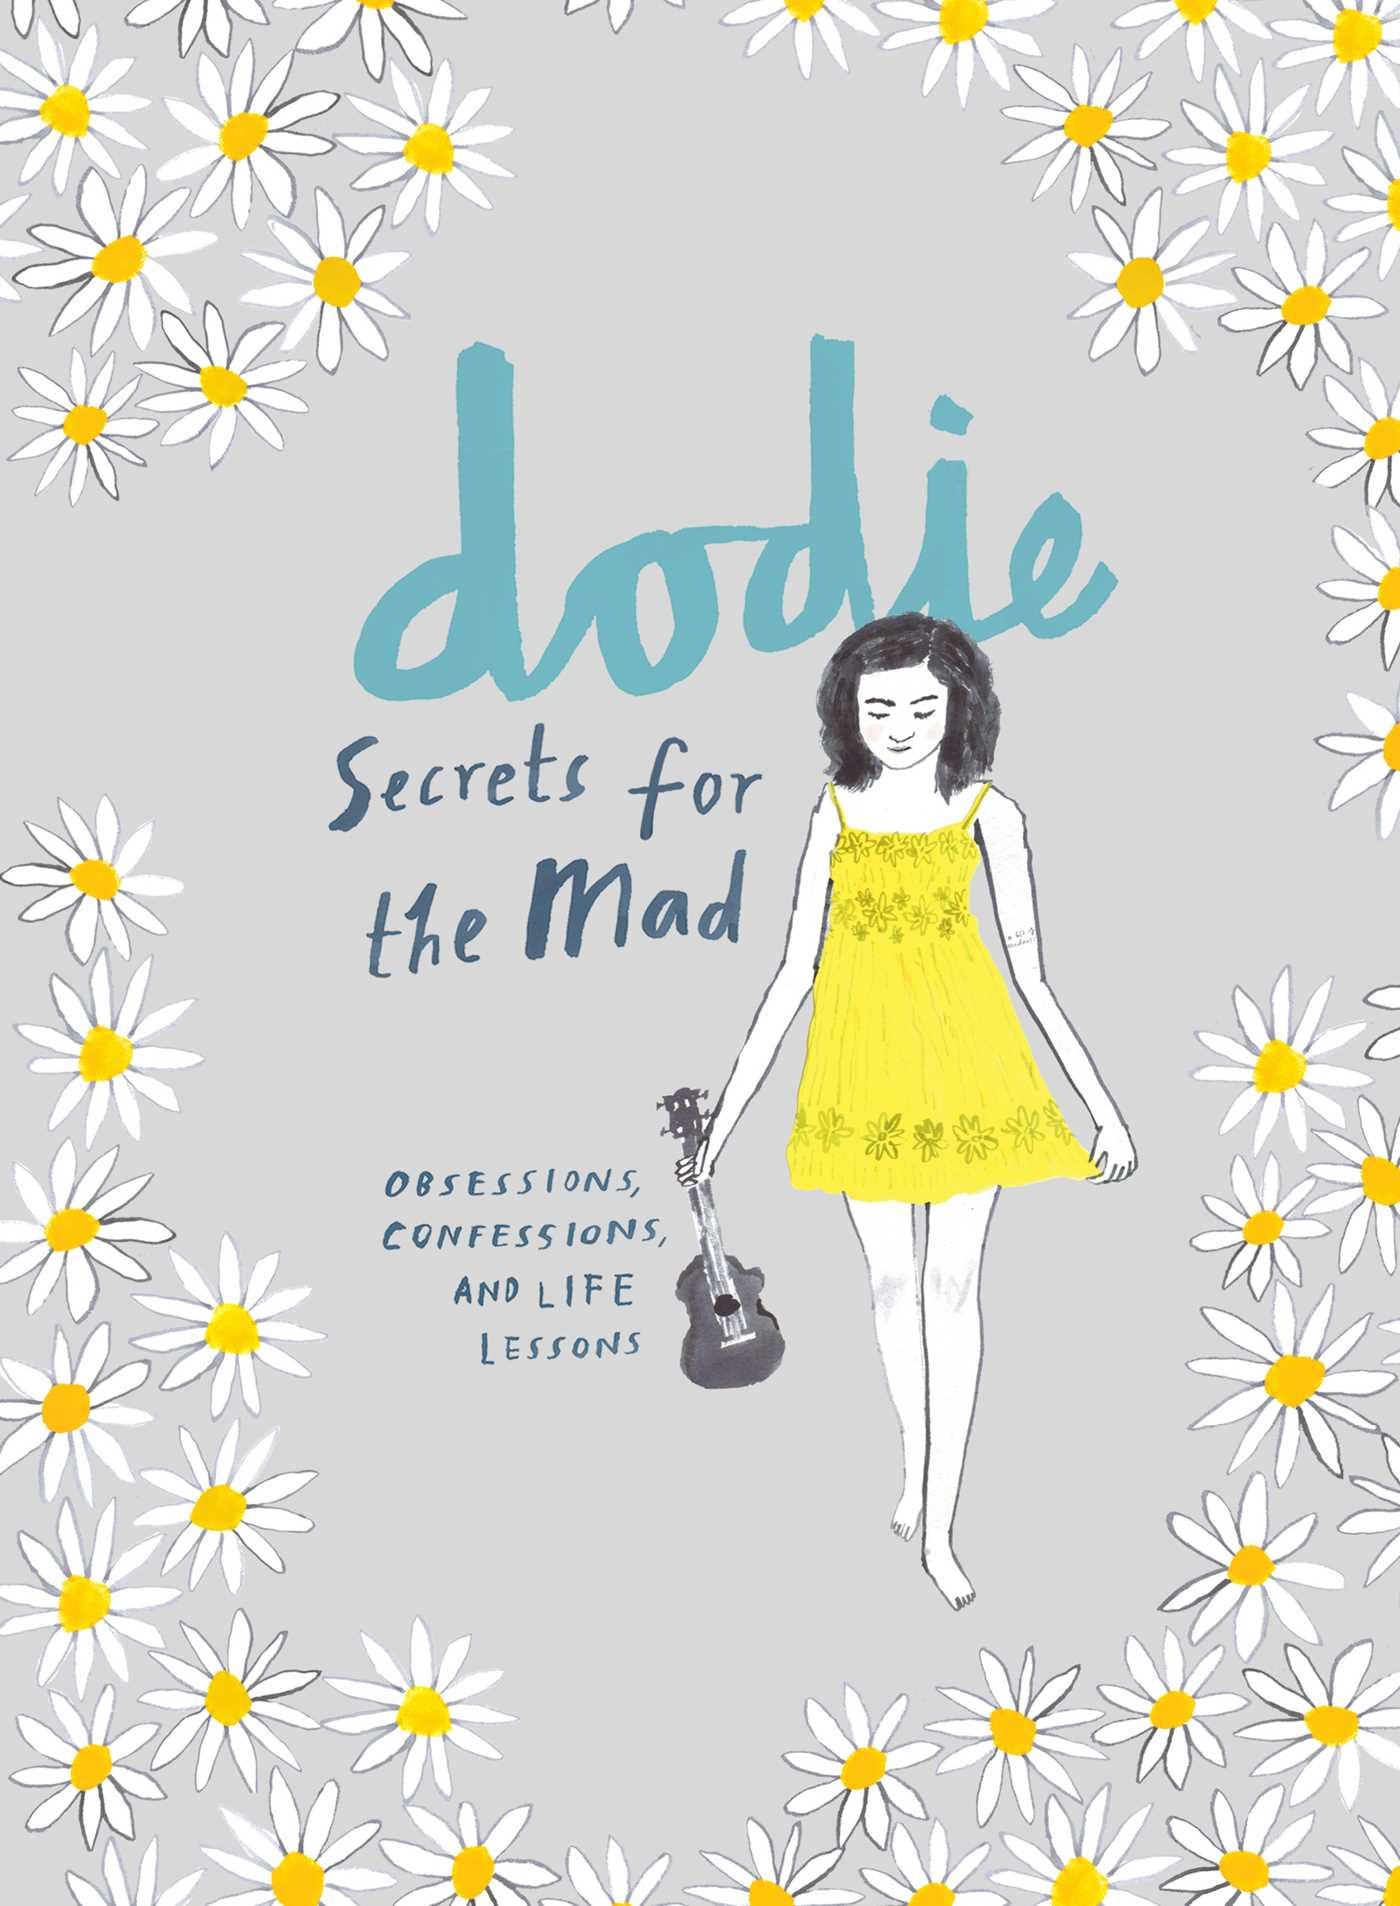 Secrets for the Mad: Obsessions, Confessions, and Life Lessons